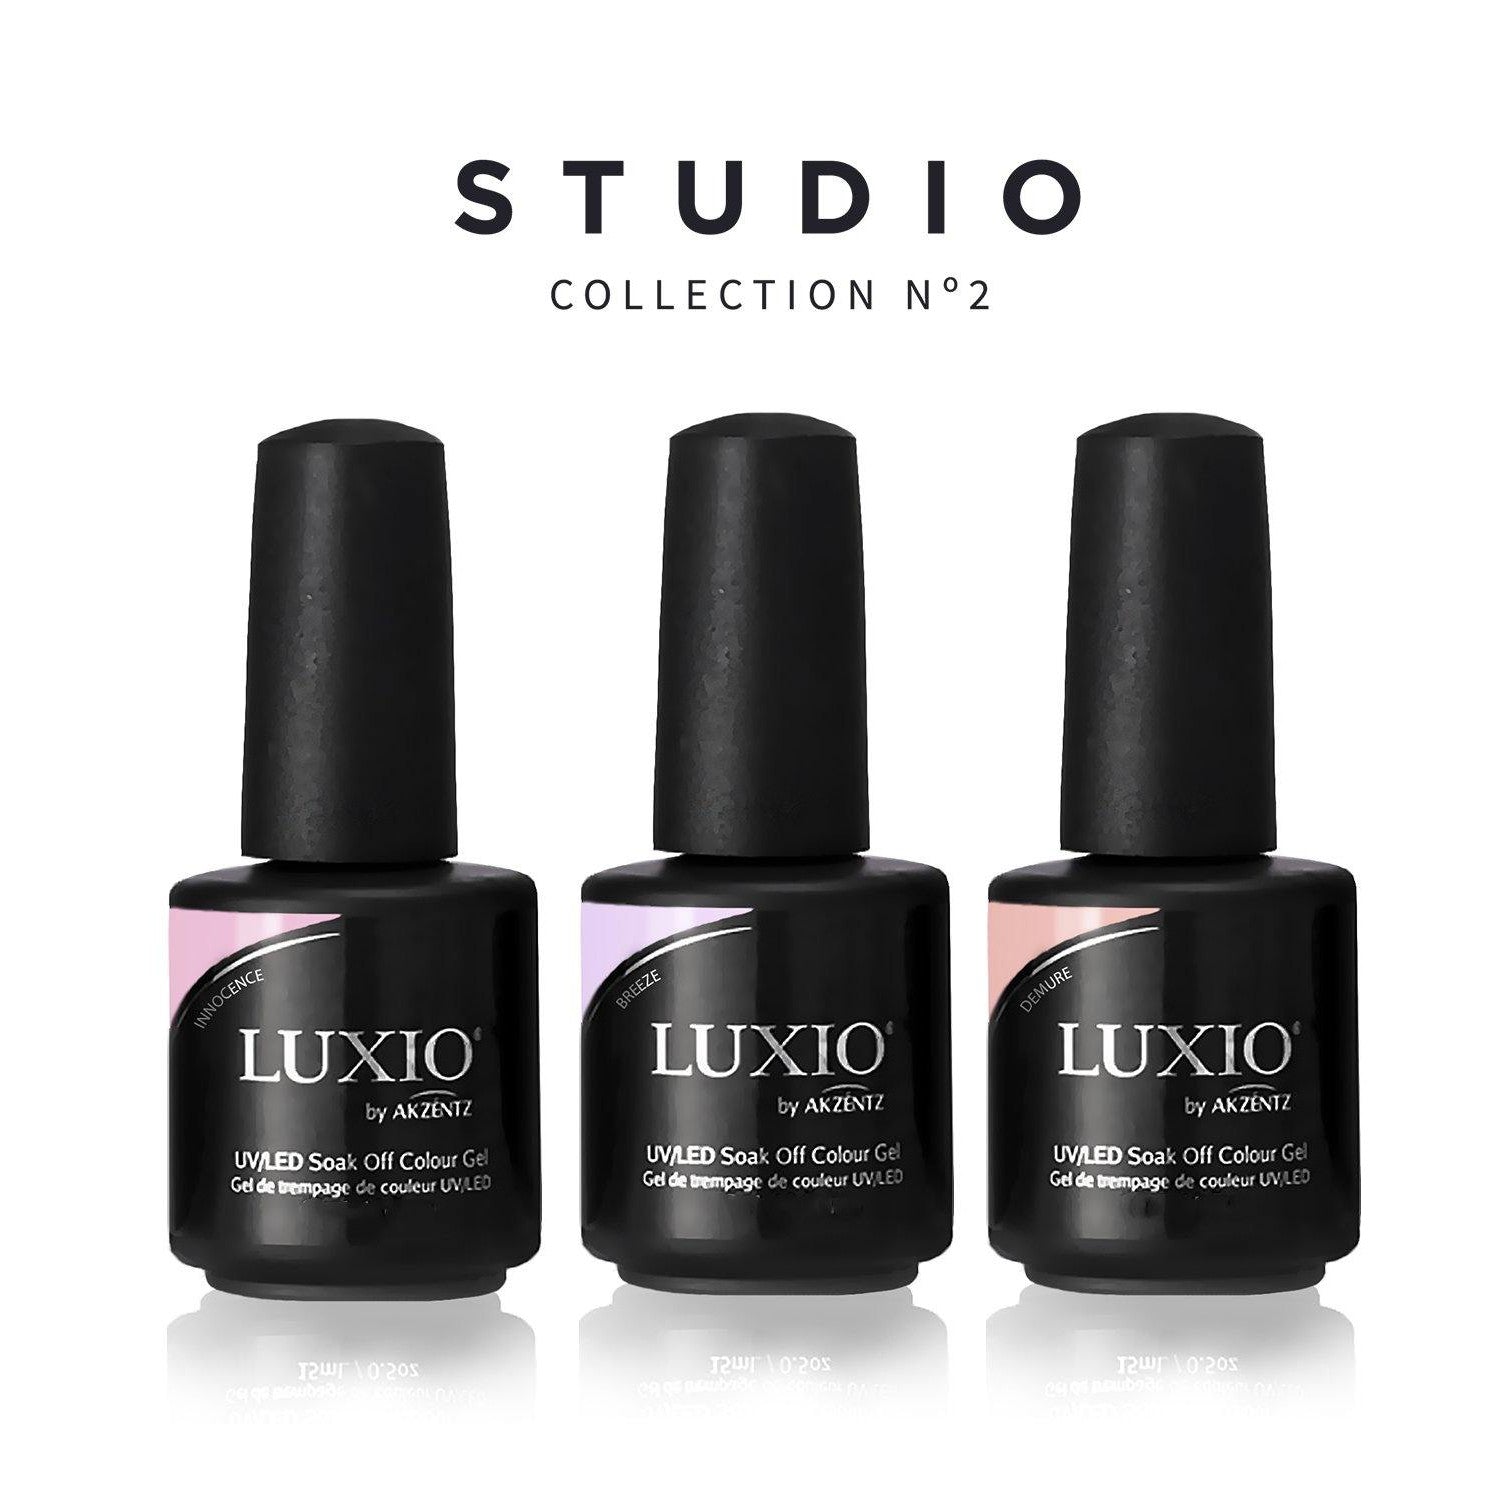 Full Size - Luxio Studio N°2 Collection (15ml size - all 3 colors) - Gel Essentialz